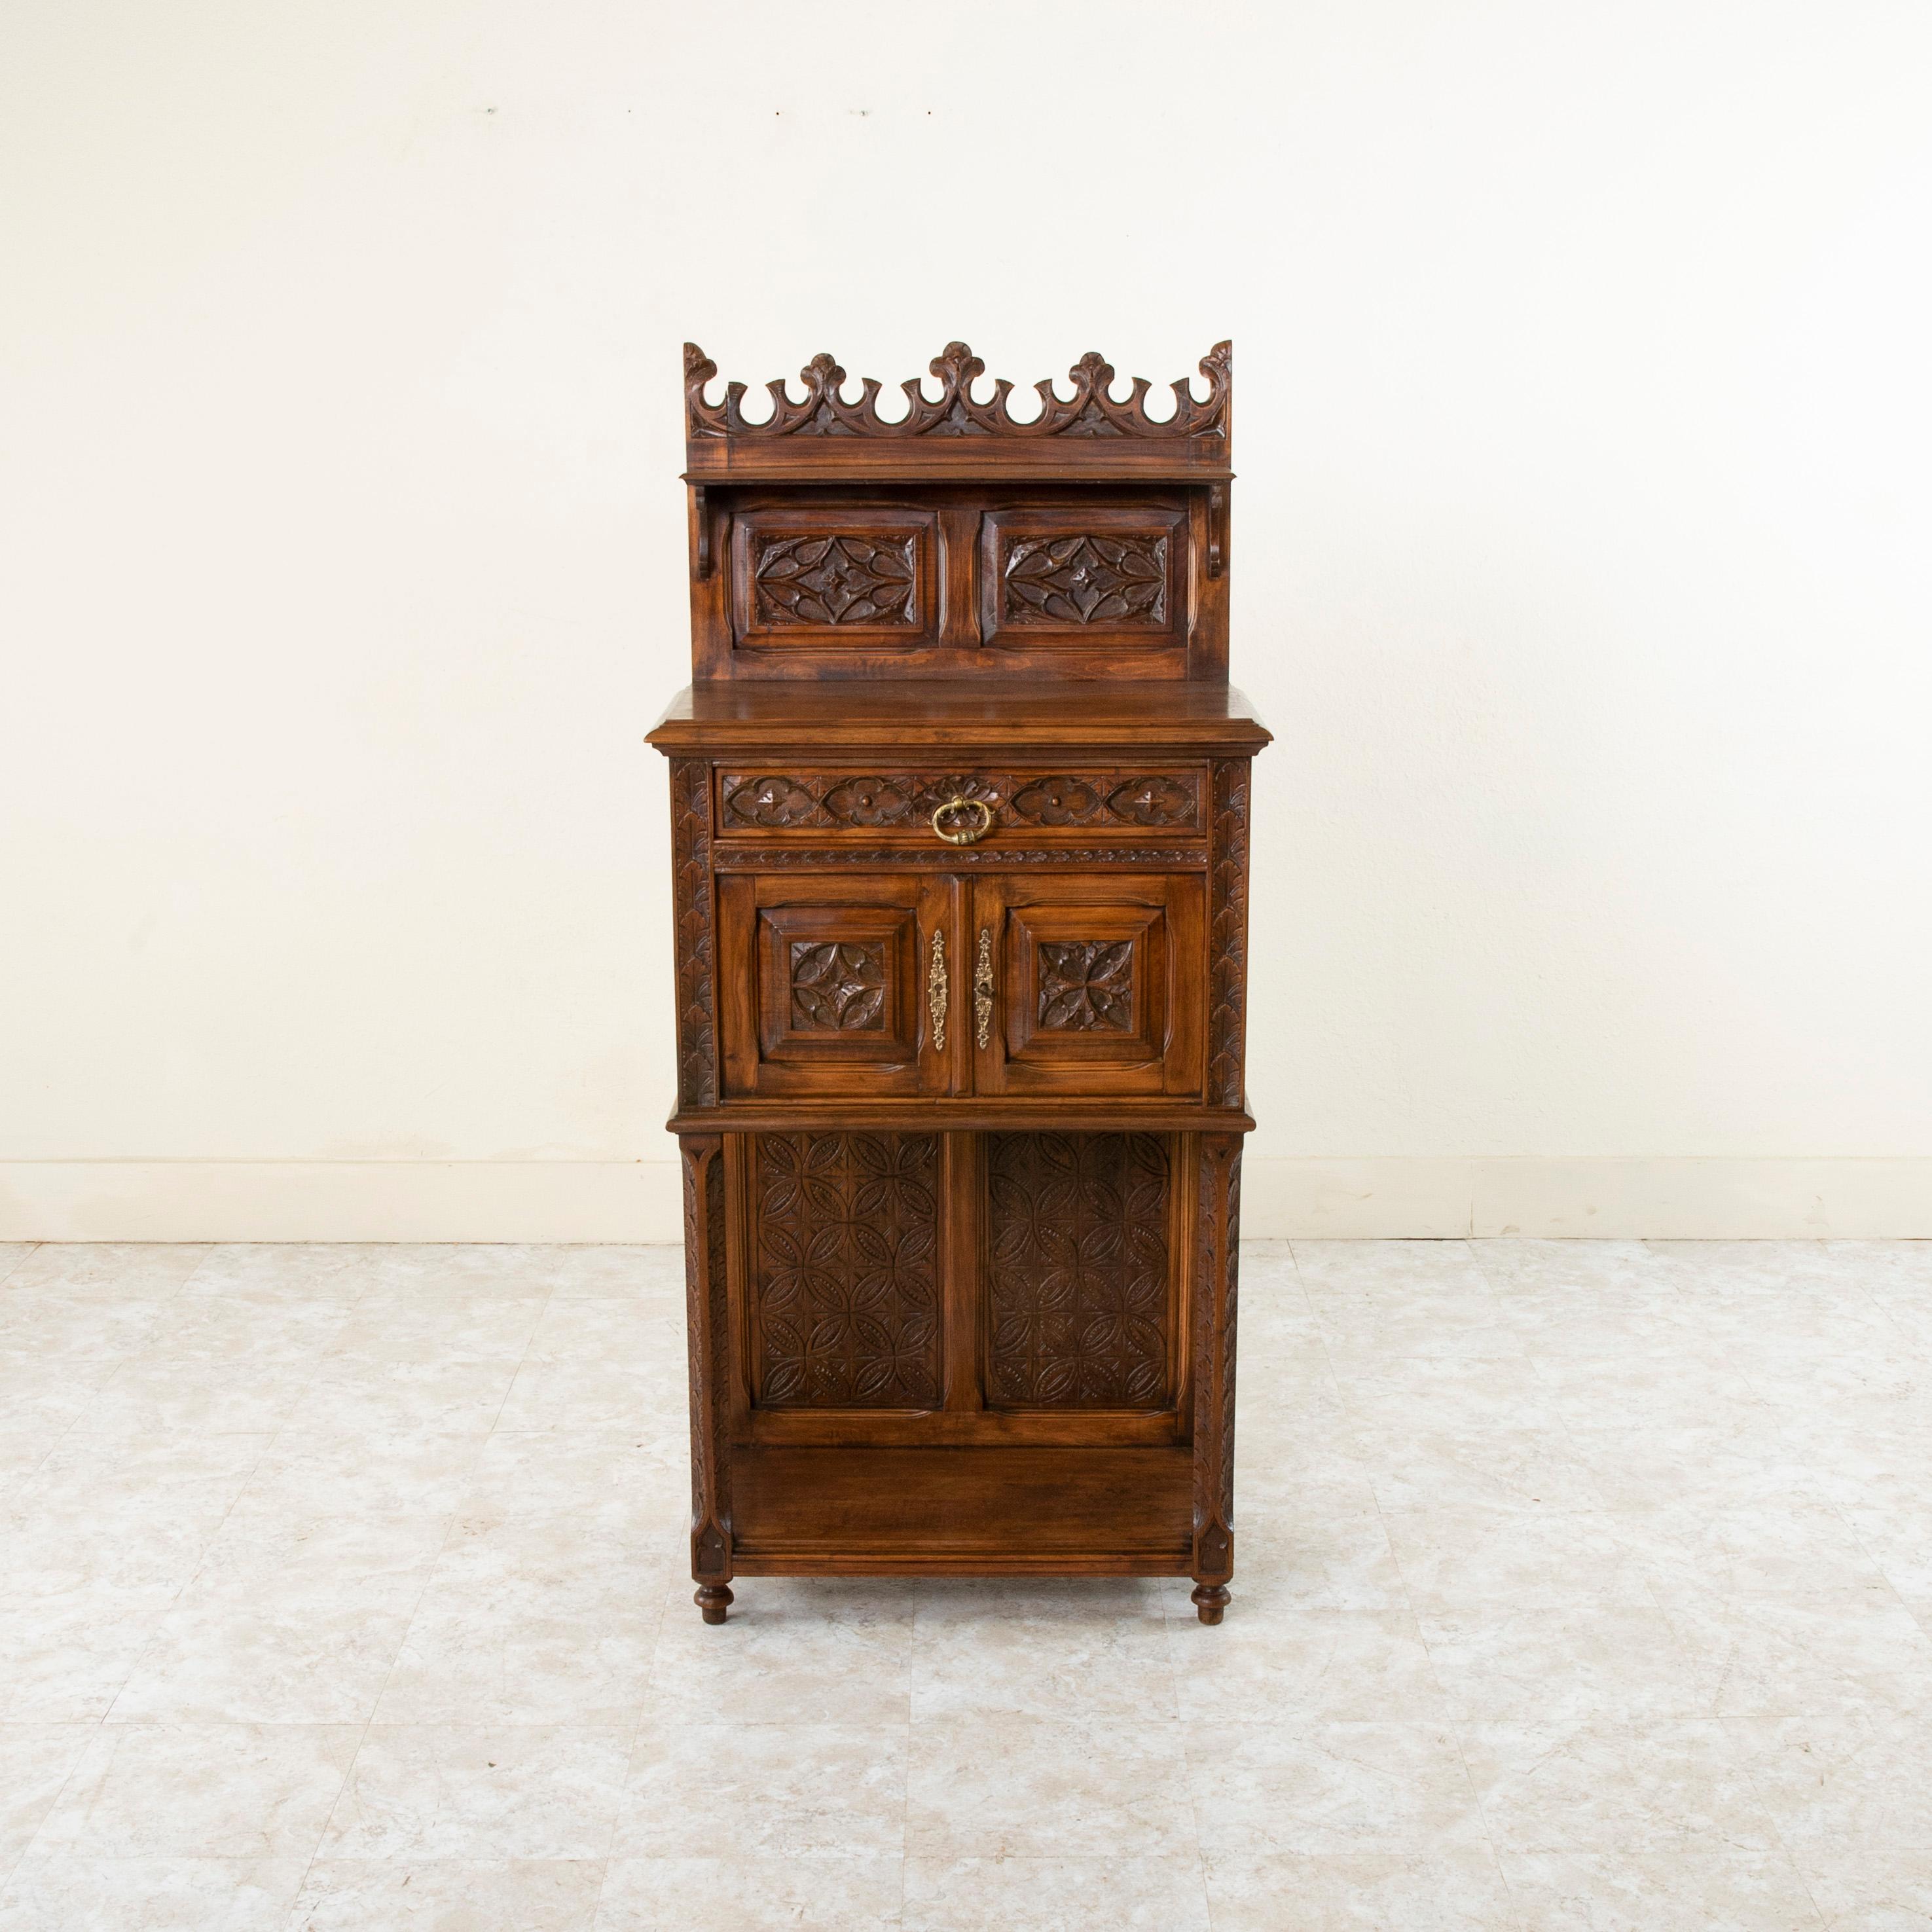 This late nineteenth century French Gothic style cabinet is constructed of solid walnut and features hand carved detailing of Gothic motifs on all of its forward facing panels, doors, and drawer. The single drawer of dovetail construction rests